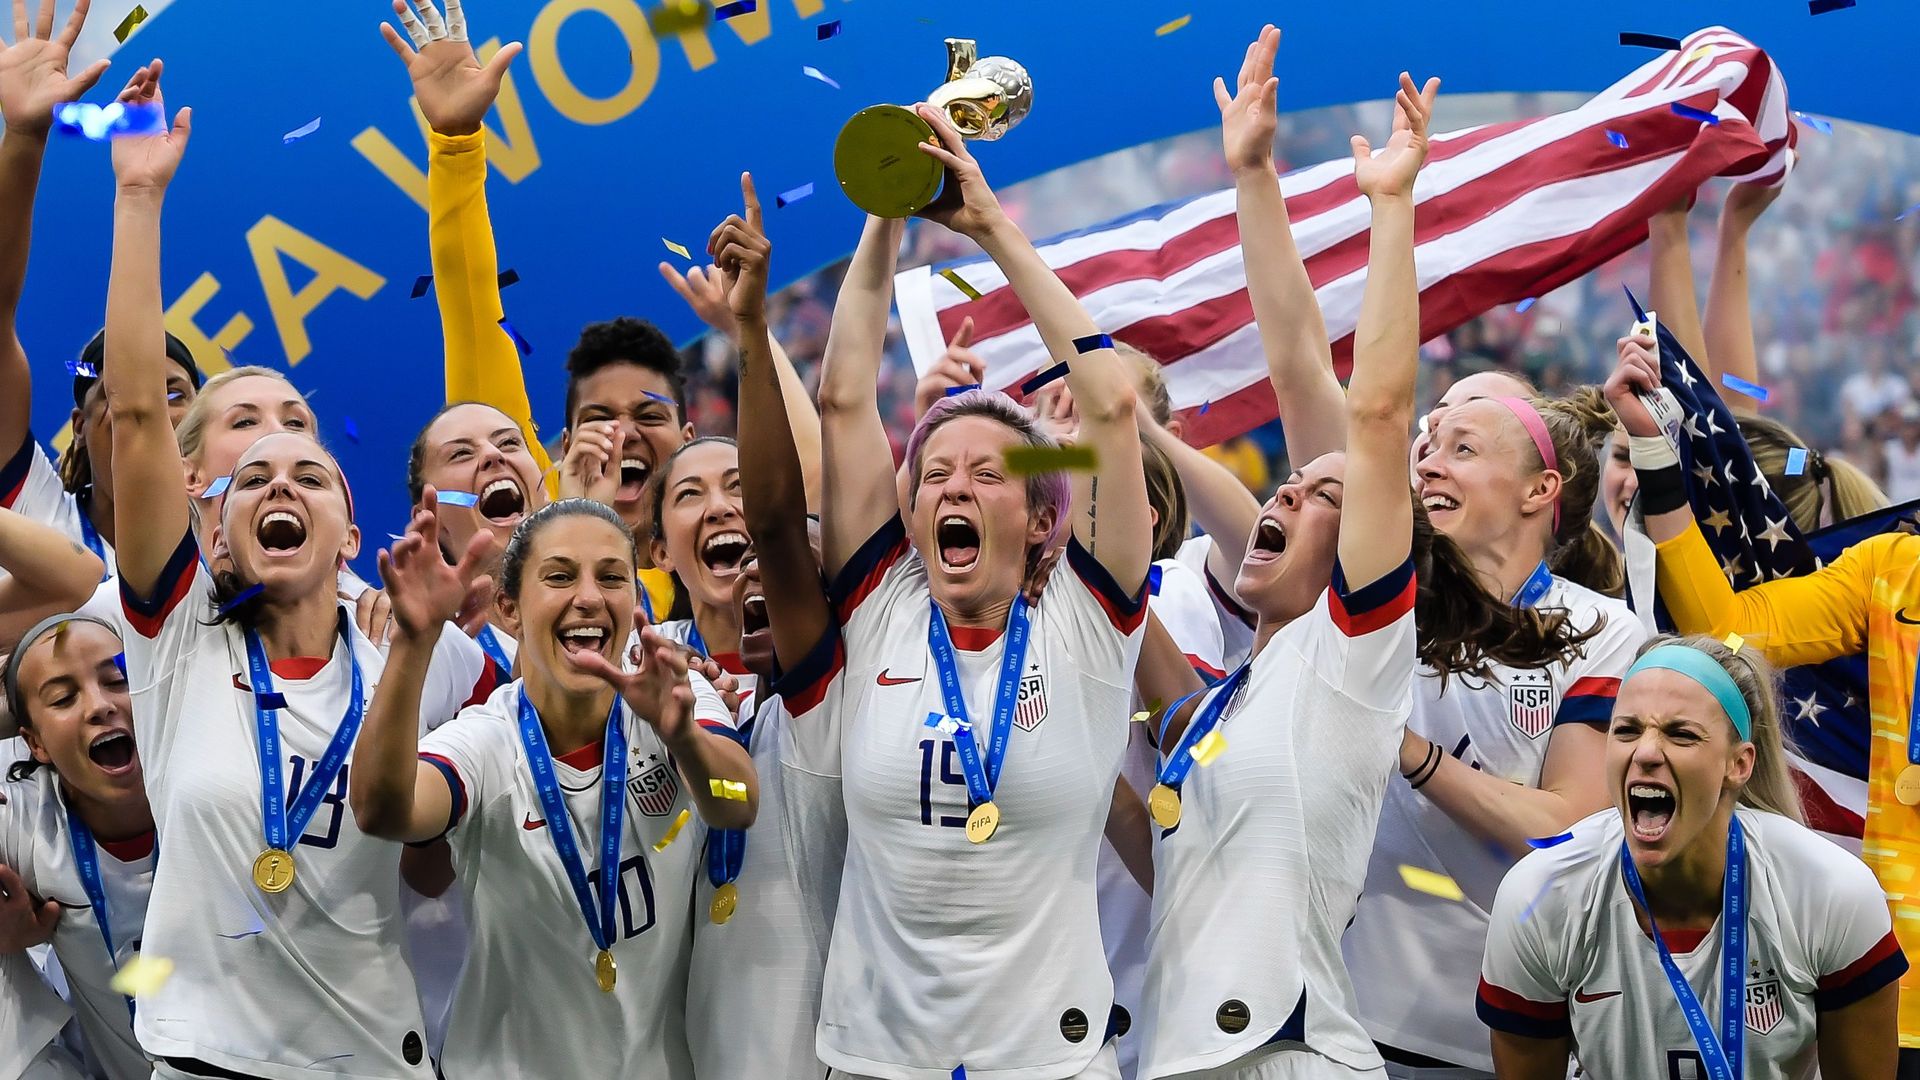 The U.S. women's soccer team holds the World Cup trophy at t Stade de Lyon on July 07, 2019 in Lyon, France.